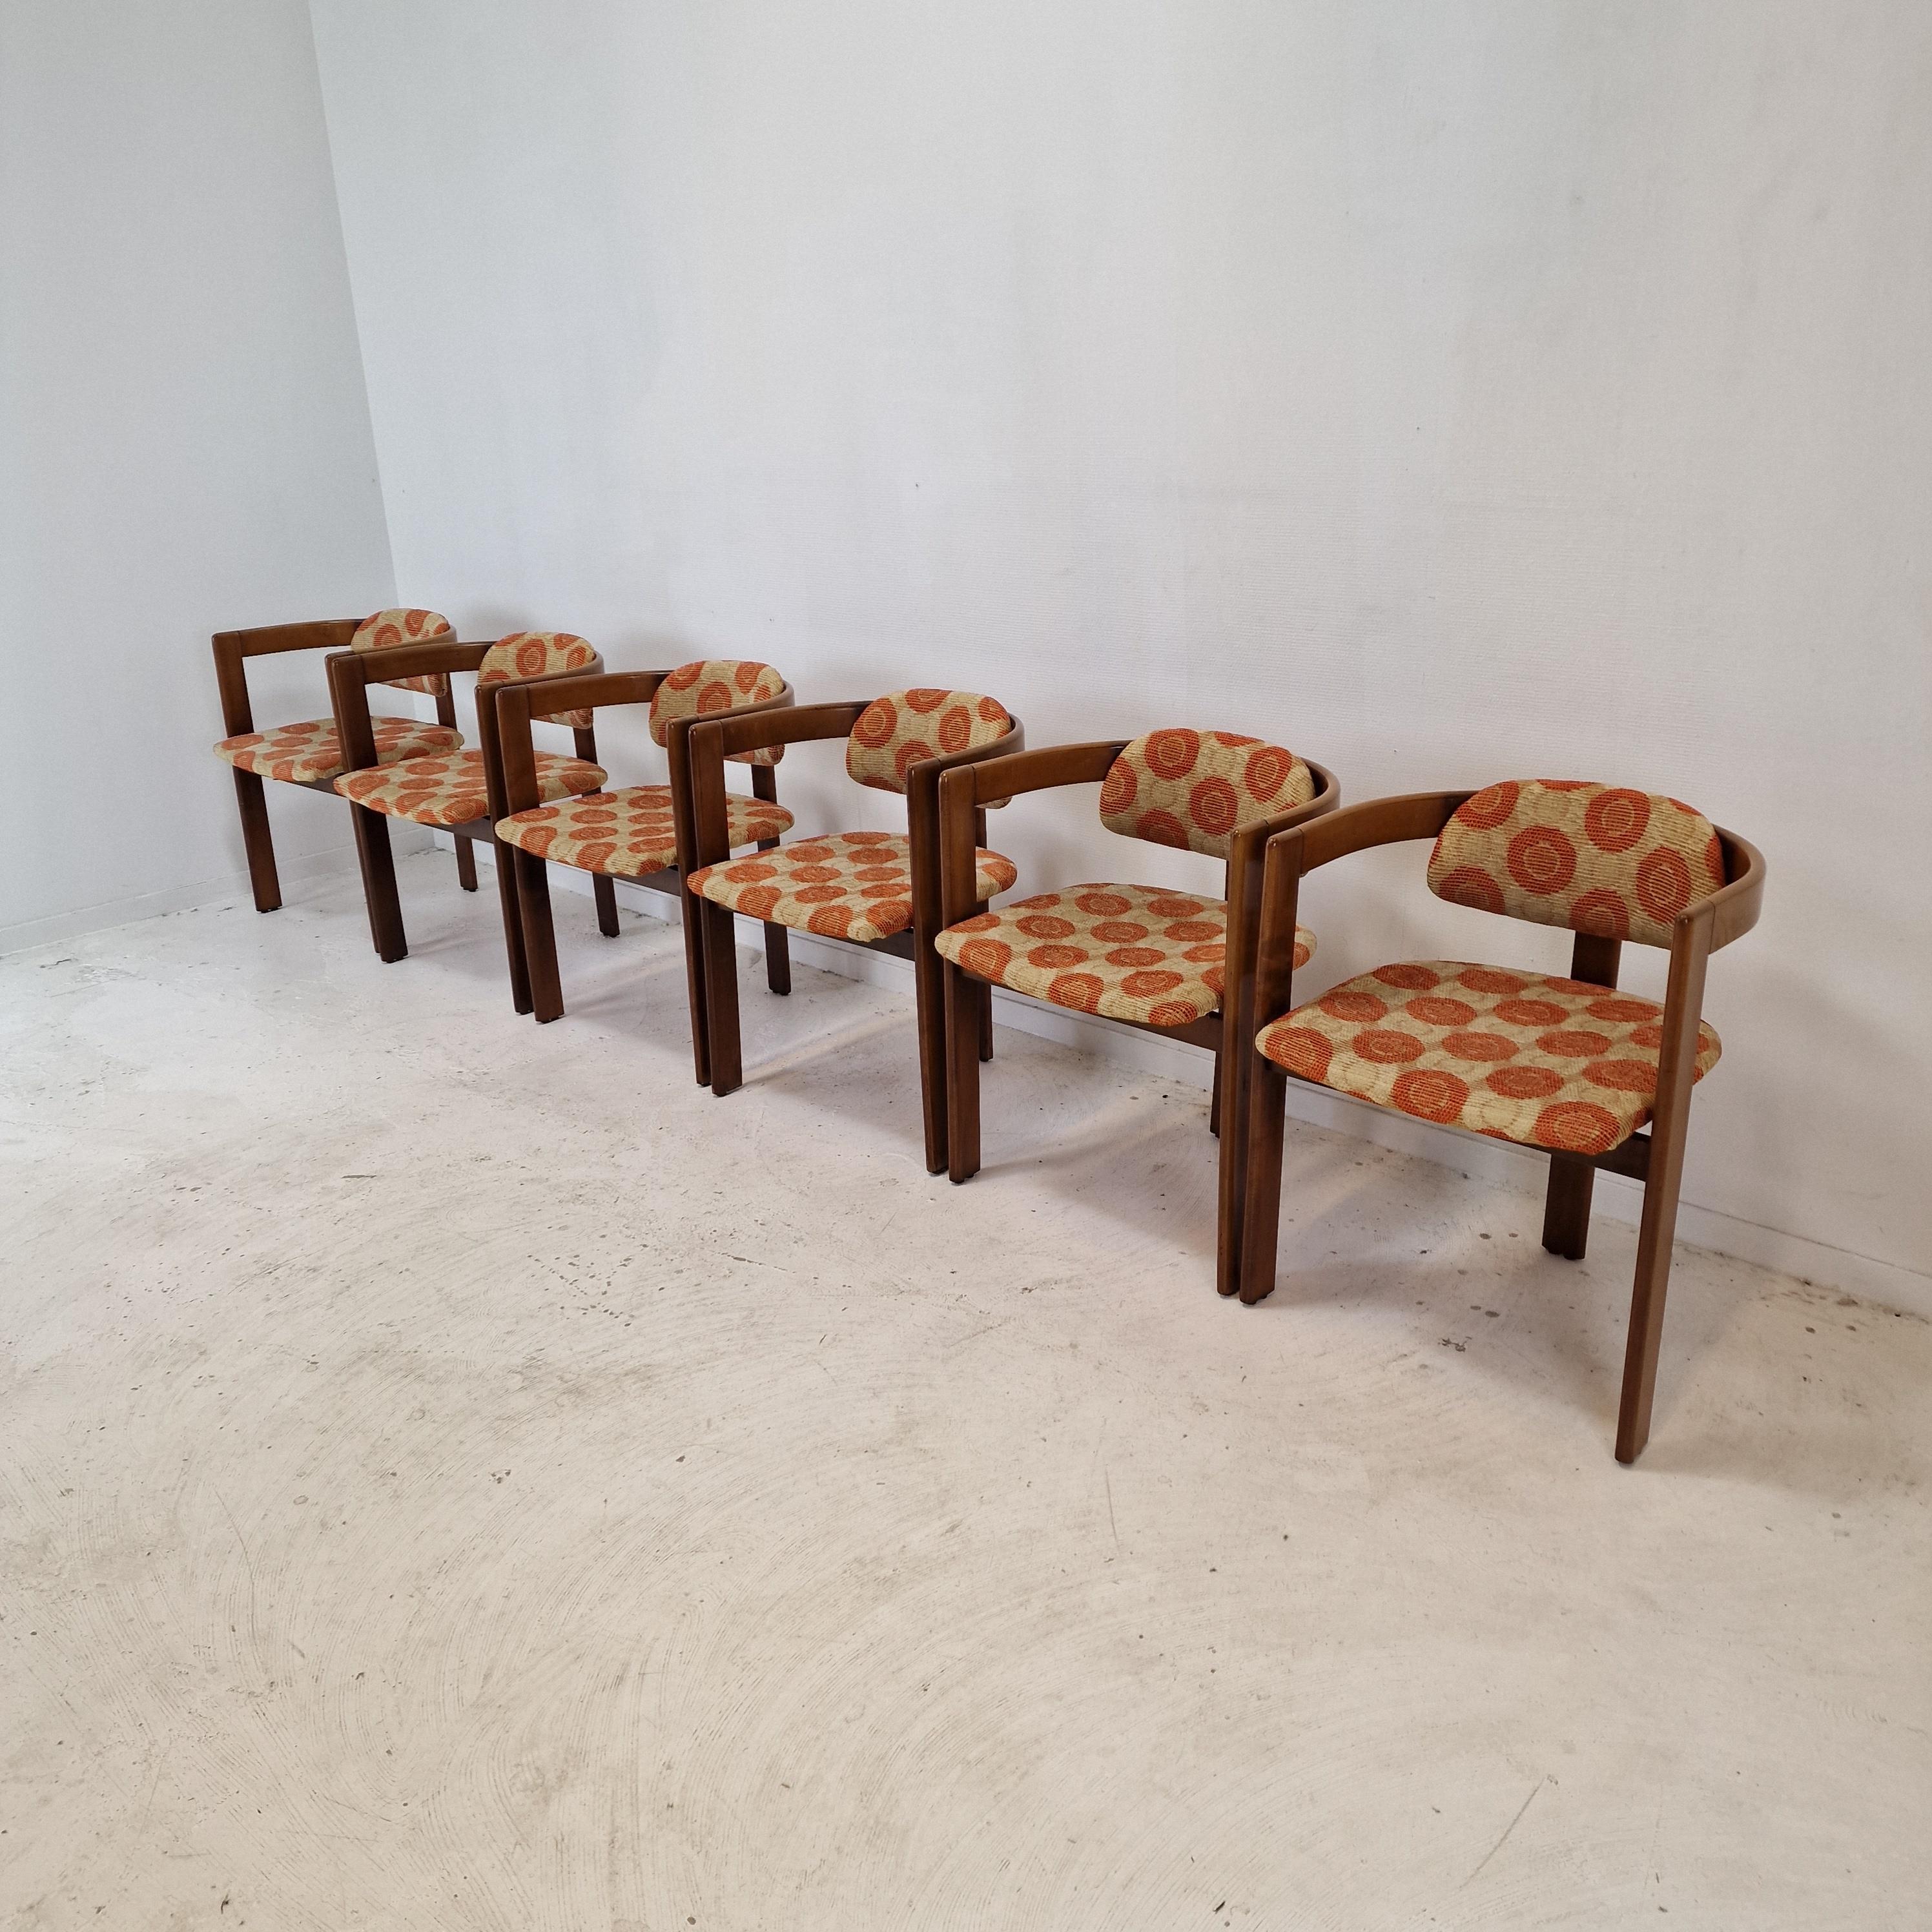 Stunning set of 6 beautiful Italian chairs.

This lovely set of dining chairs has a strong resemblance to the Augusto Savini's 'Pamplona' chair (1965) and the Afra & Tobia Scrapa's 'Pigreco' chair (1959/60).
They have the same elegant shape and